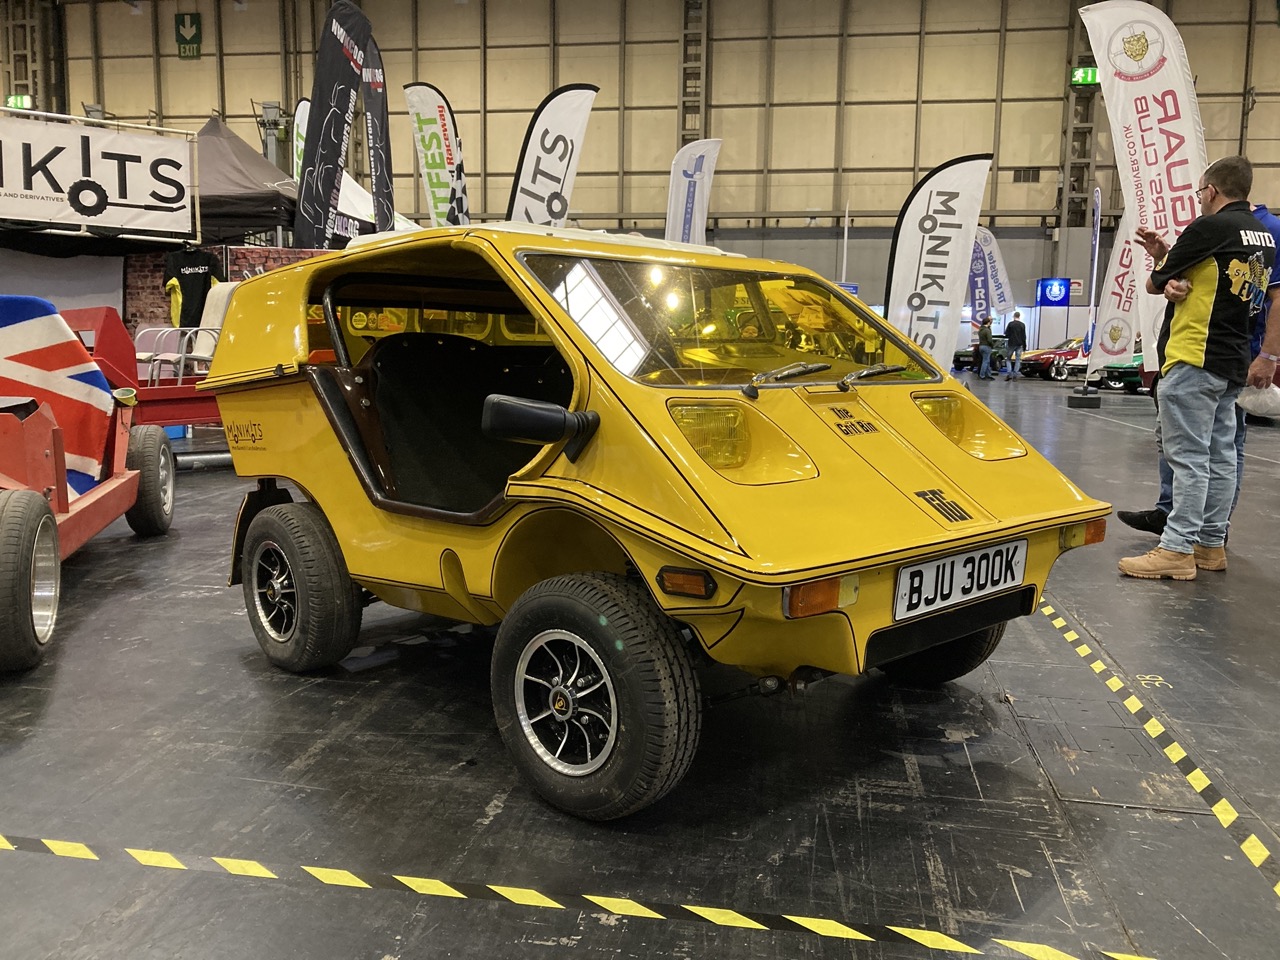 Your Classics: Paul Wylde’s Truly Titchy TiCi Kit Car